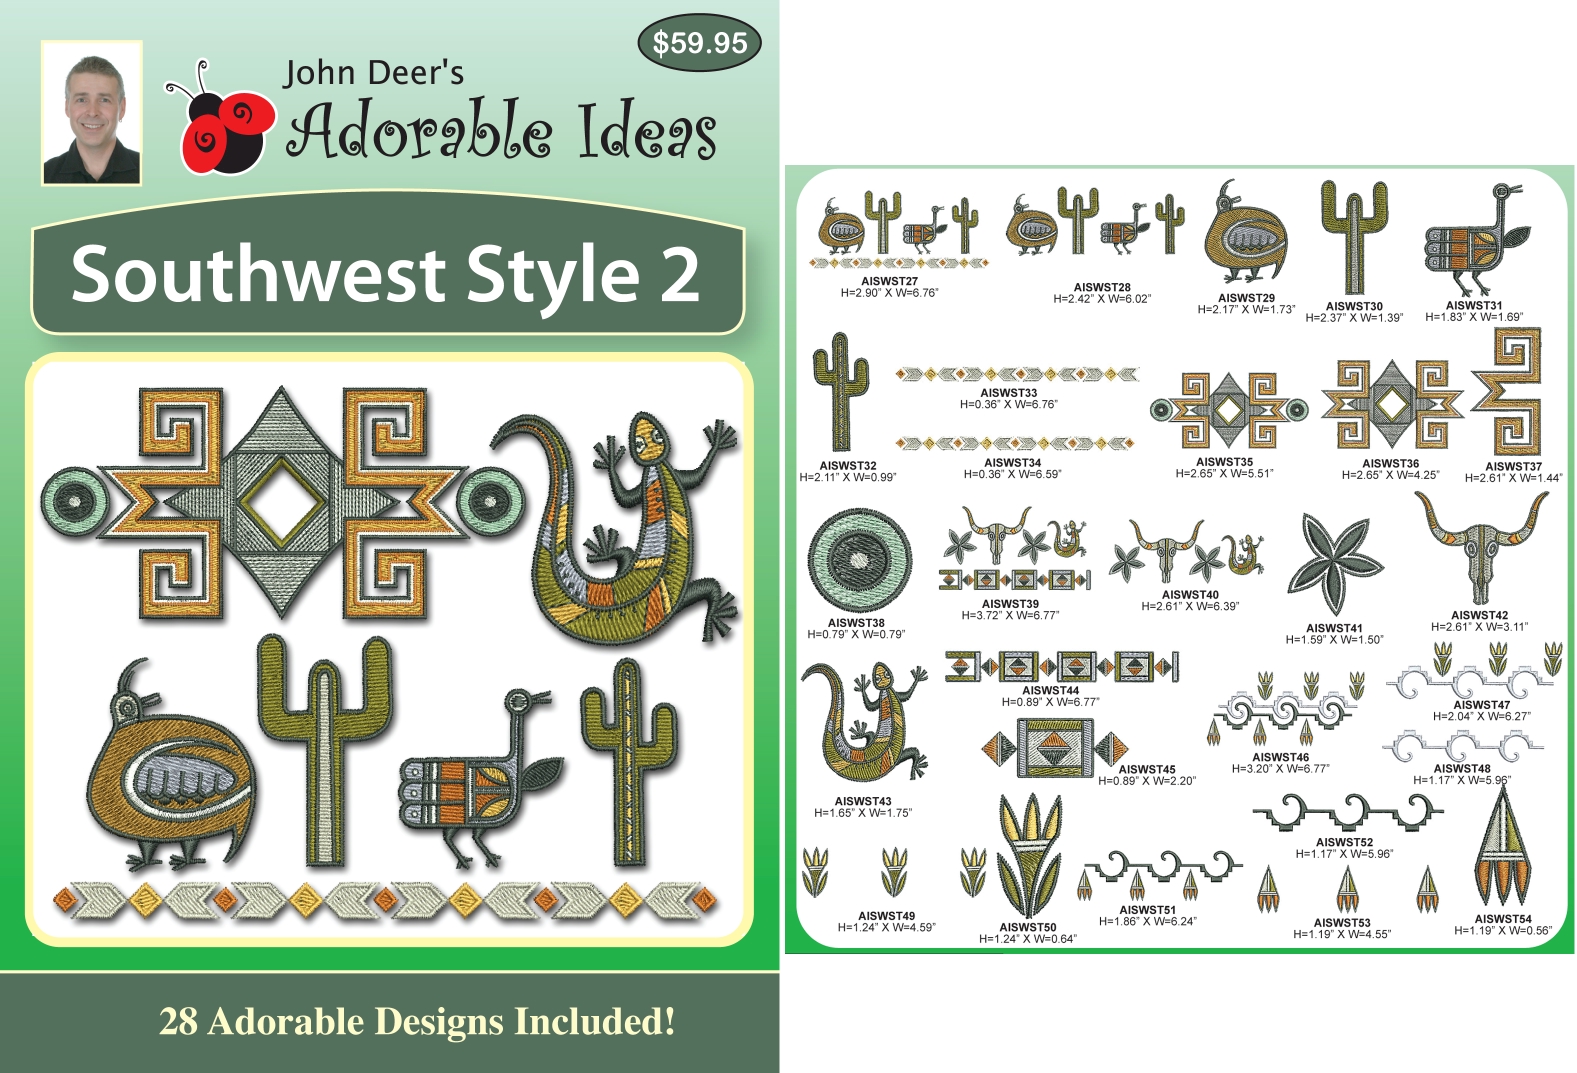 Southwest Style 2 Embroidery Designs by John Deer's Adorable Ideas - Multi-Format CD-ROM